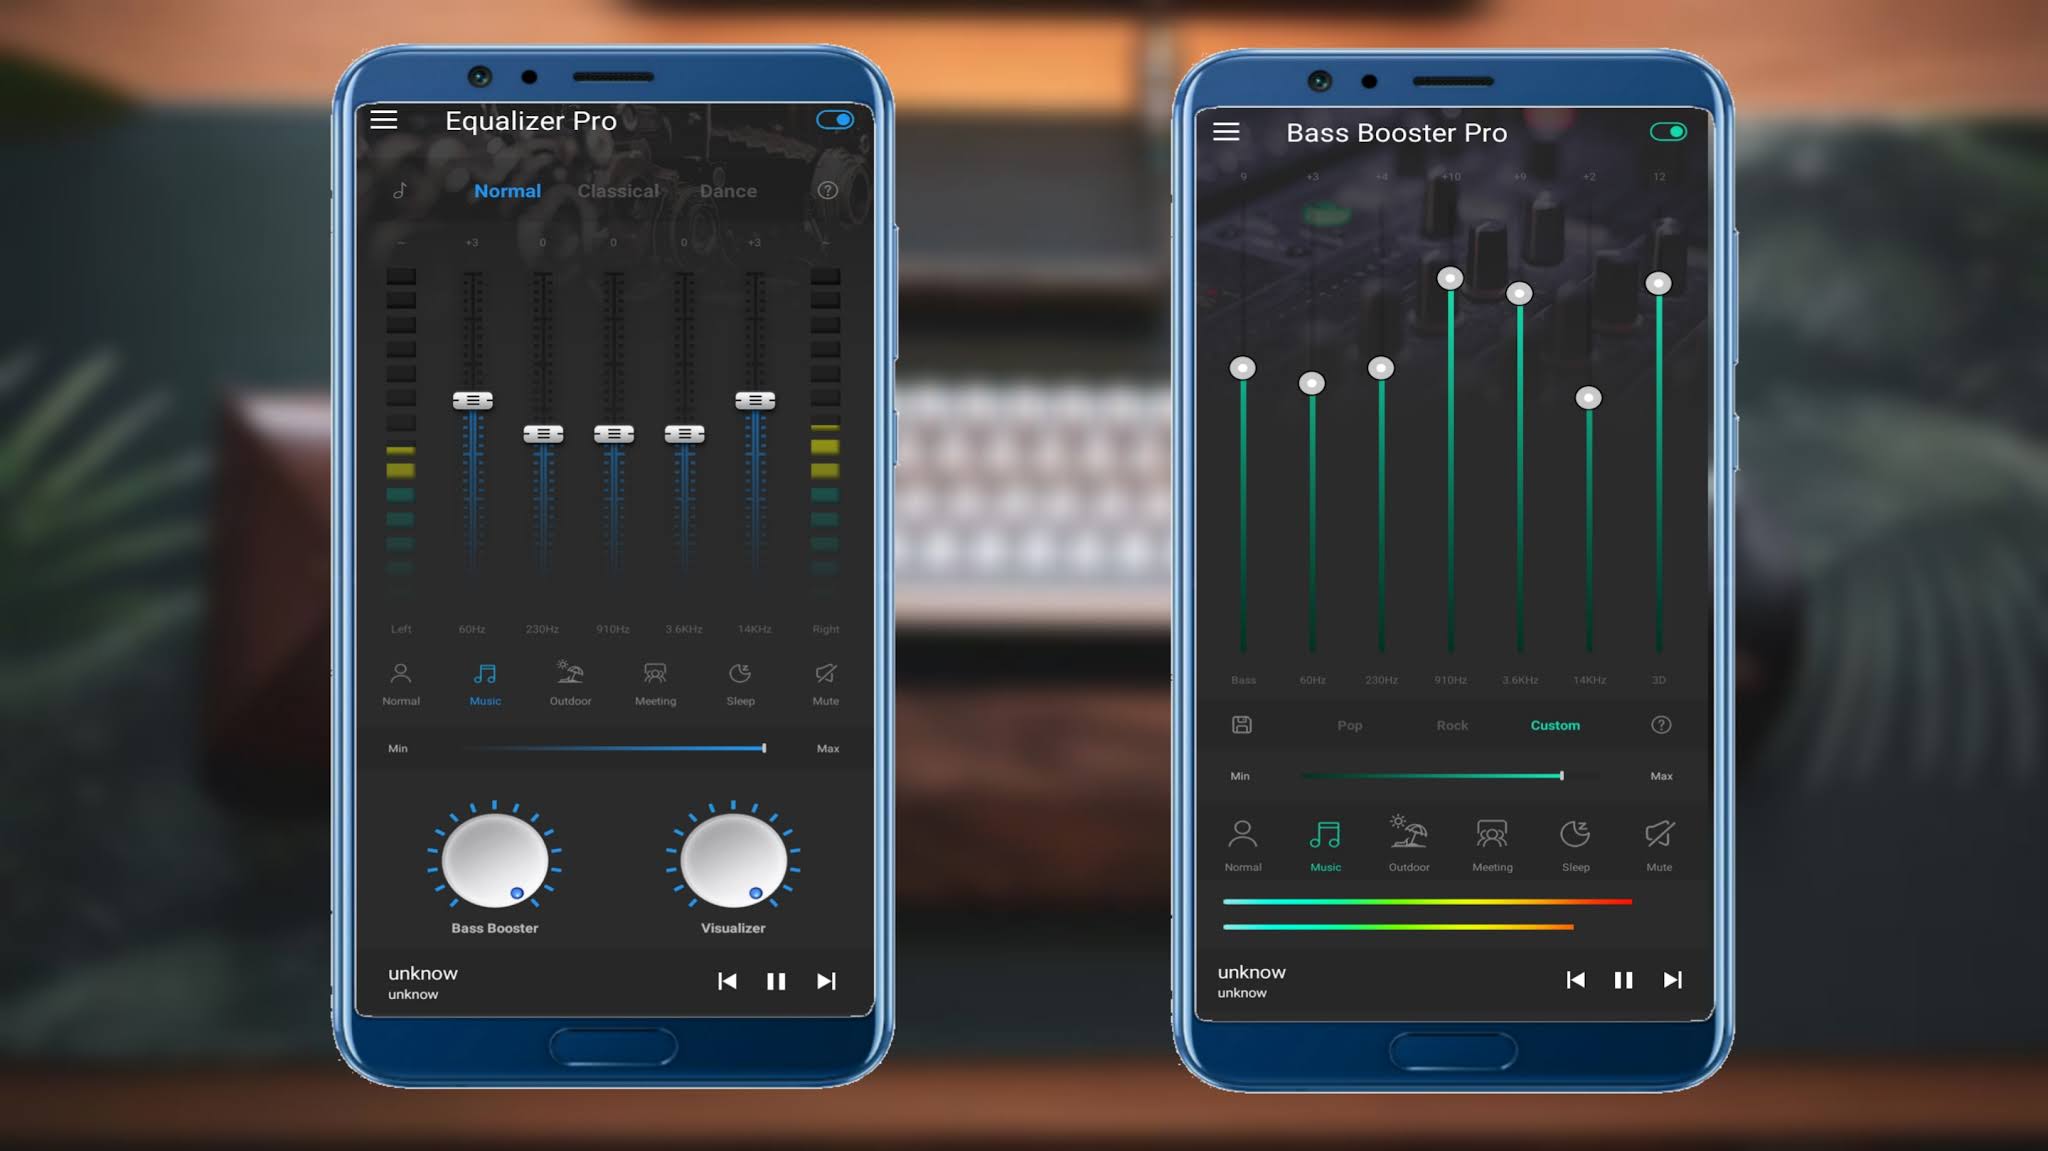 Bass equalizer. Эквалайзер Bass Booster. Equalizer FX Android 4.4. Boss Mini a5 эквалайзер. TONEBOOSTERS Equalizer 4.1.3.